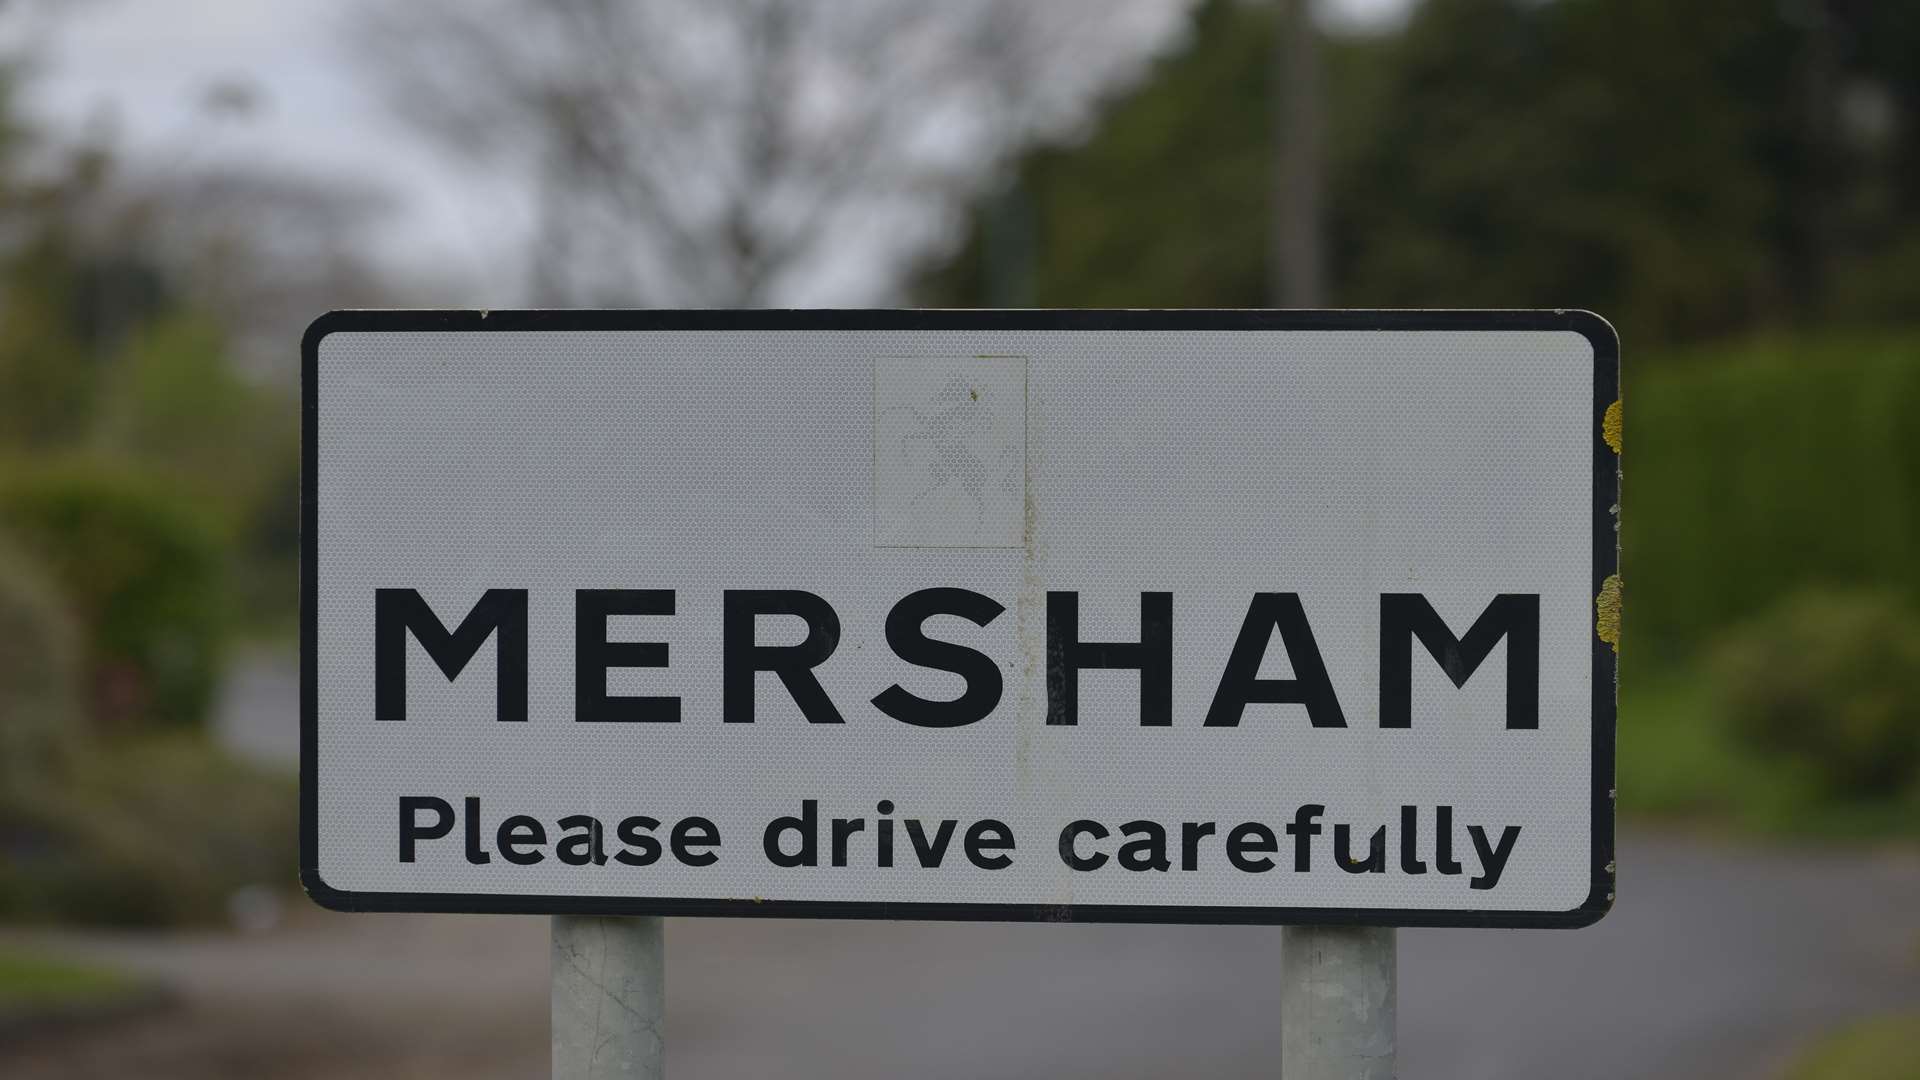 The man was discovered in a road in Mersham